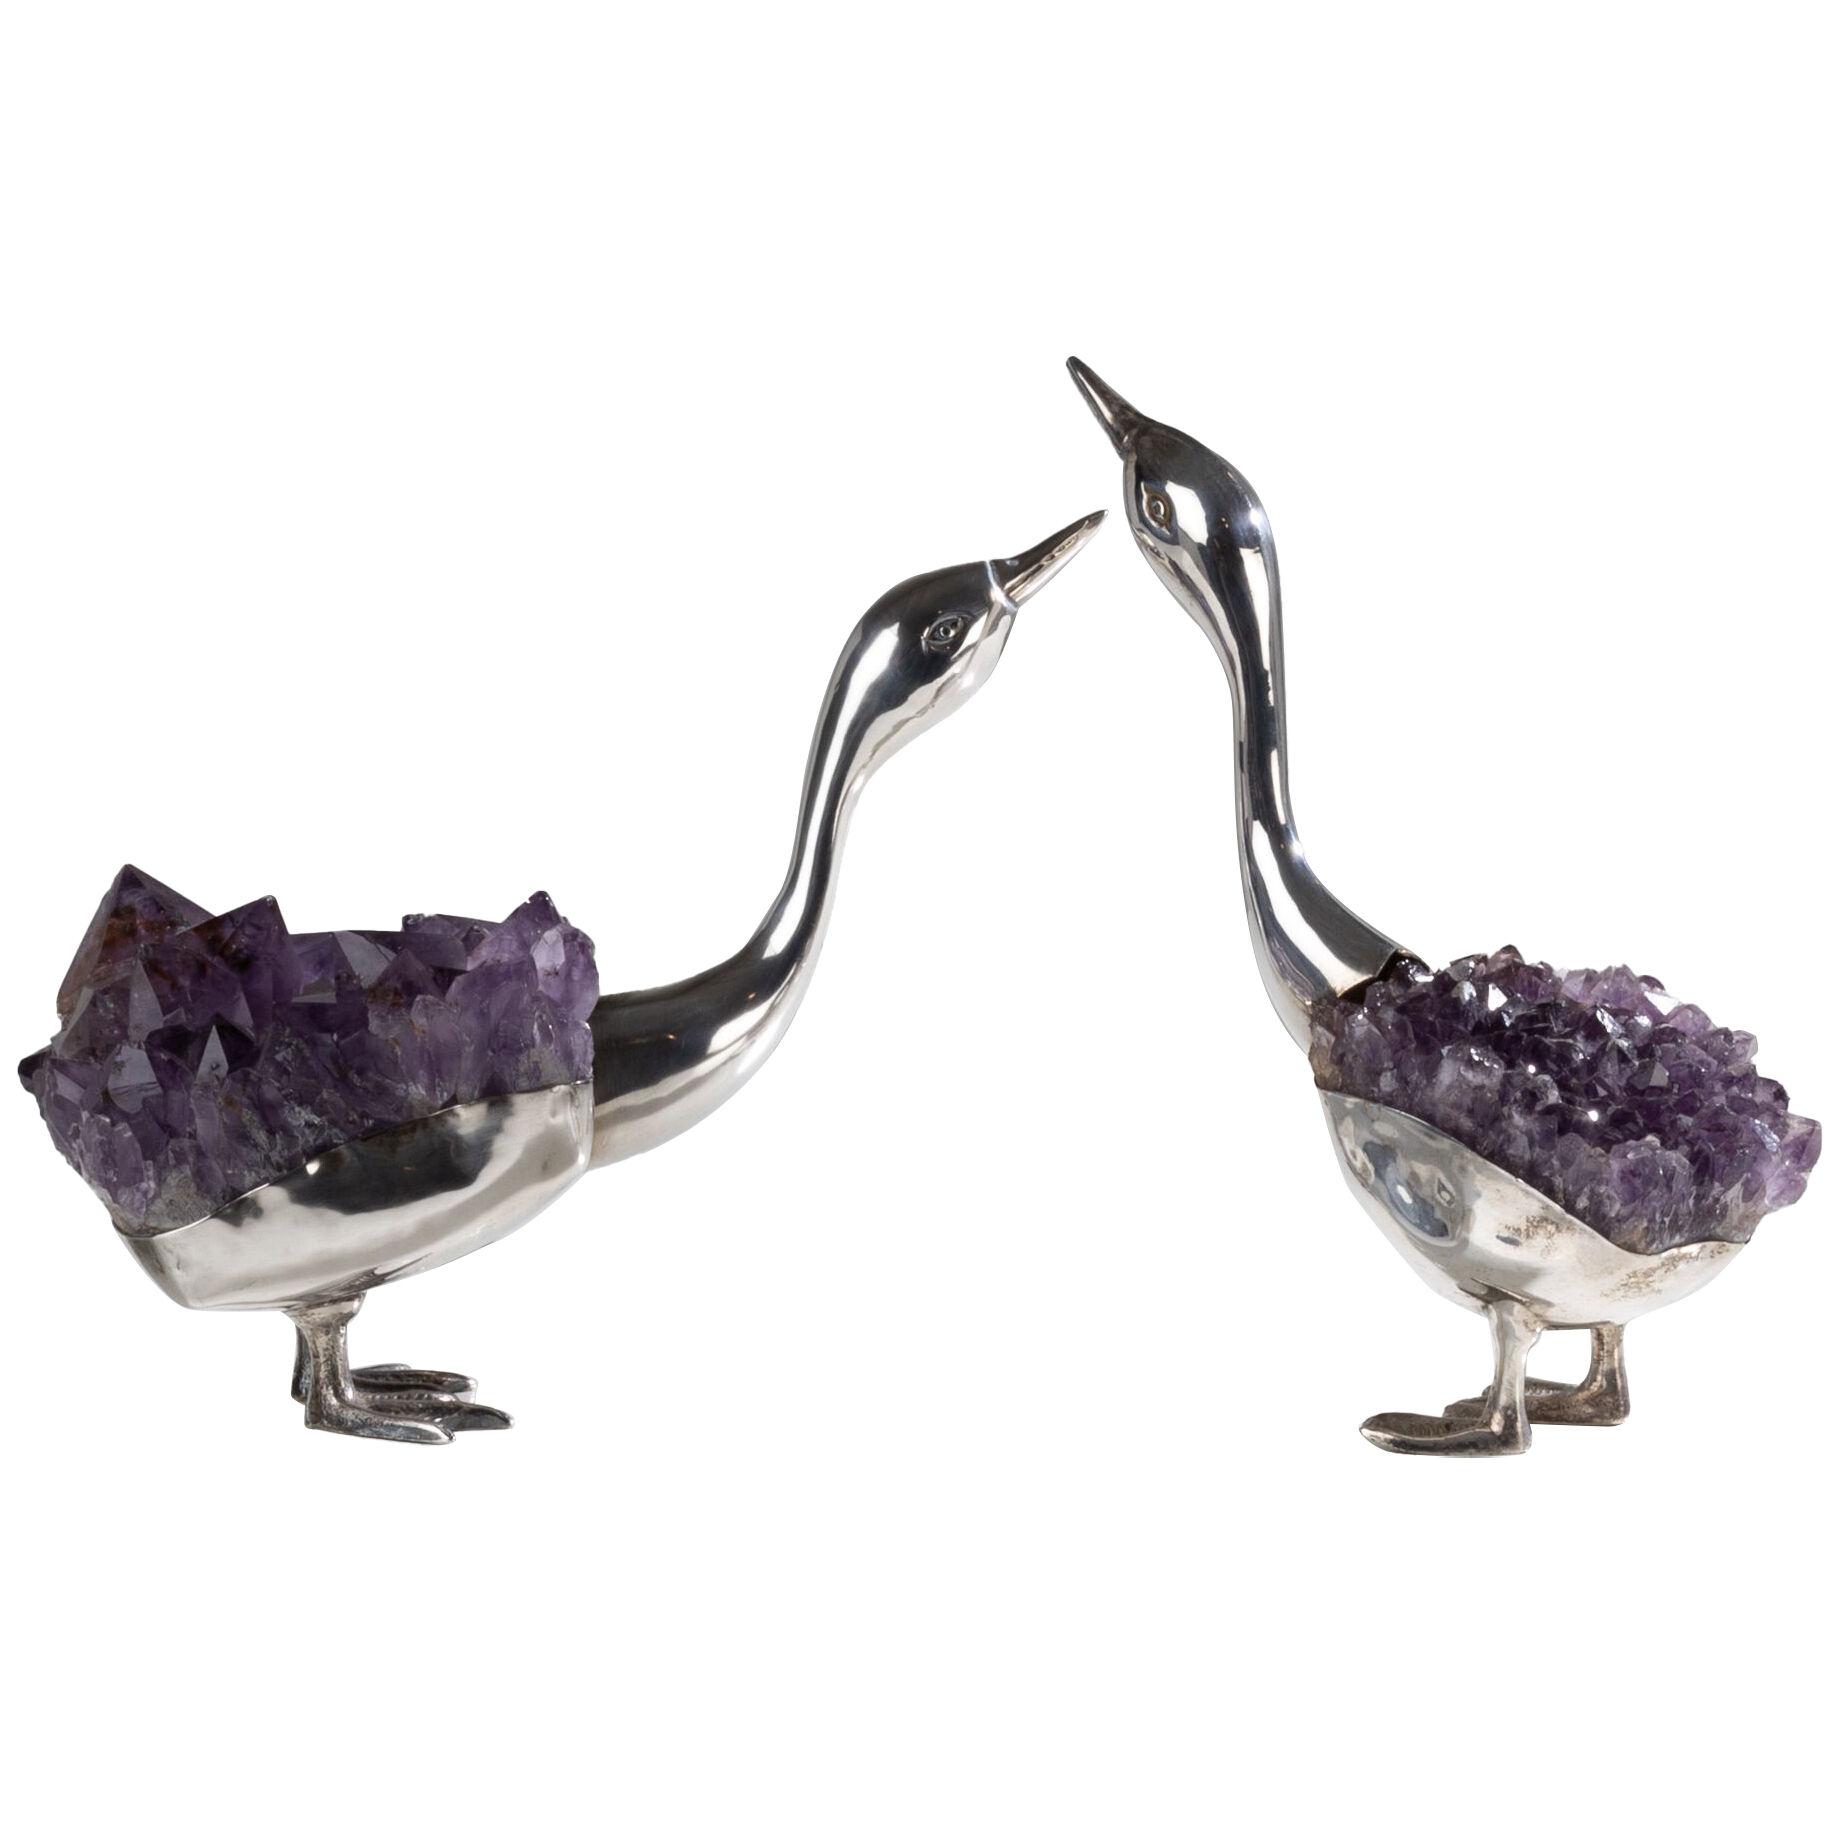 Pair of swans in silver metal by Gerson of Bahia – Brazil